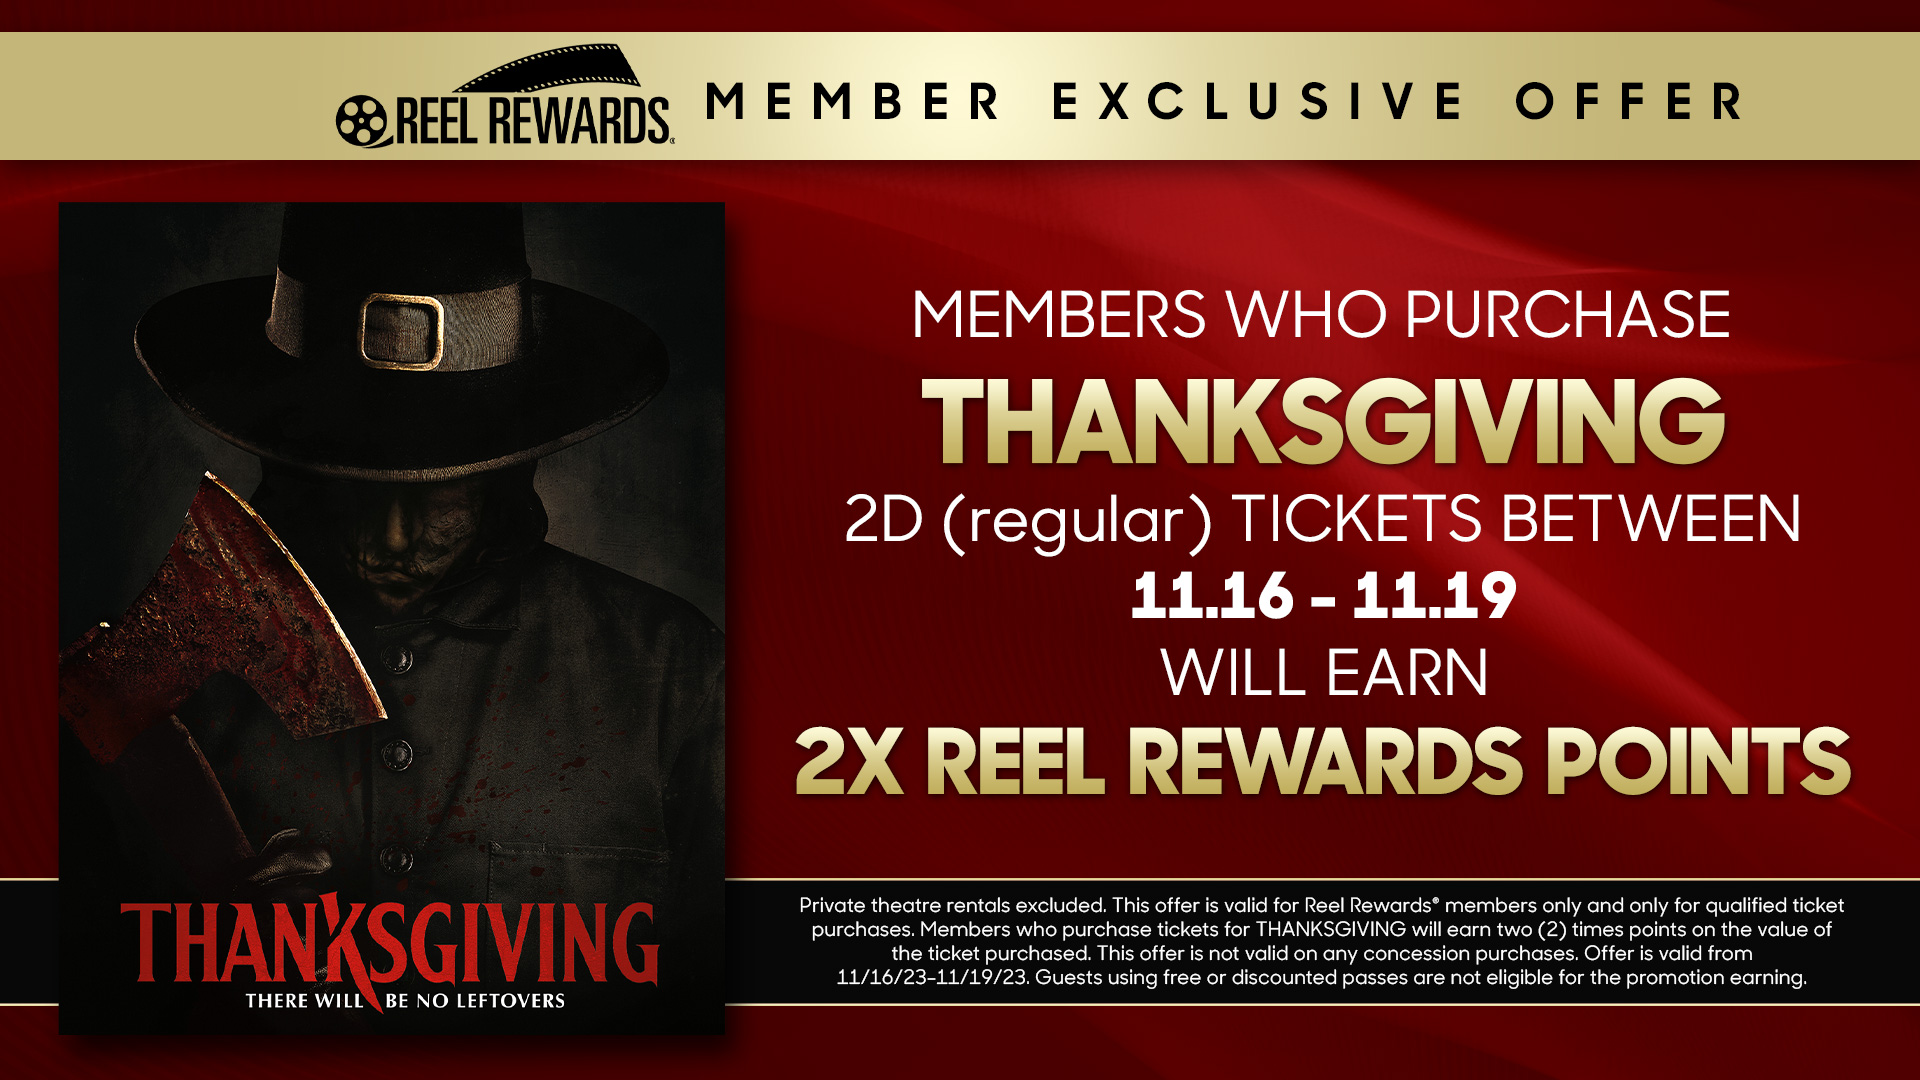 AmStar Cinemas on X: This Thanksgiving there will be no leftovers